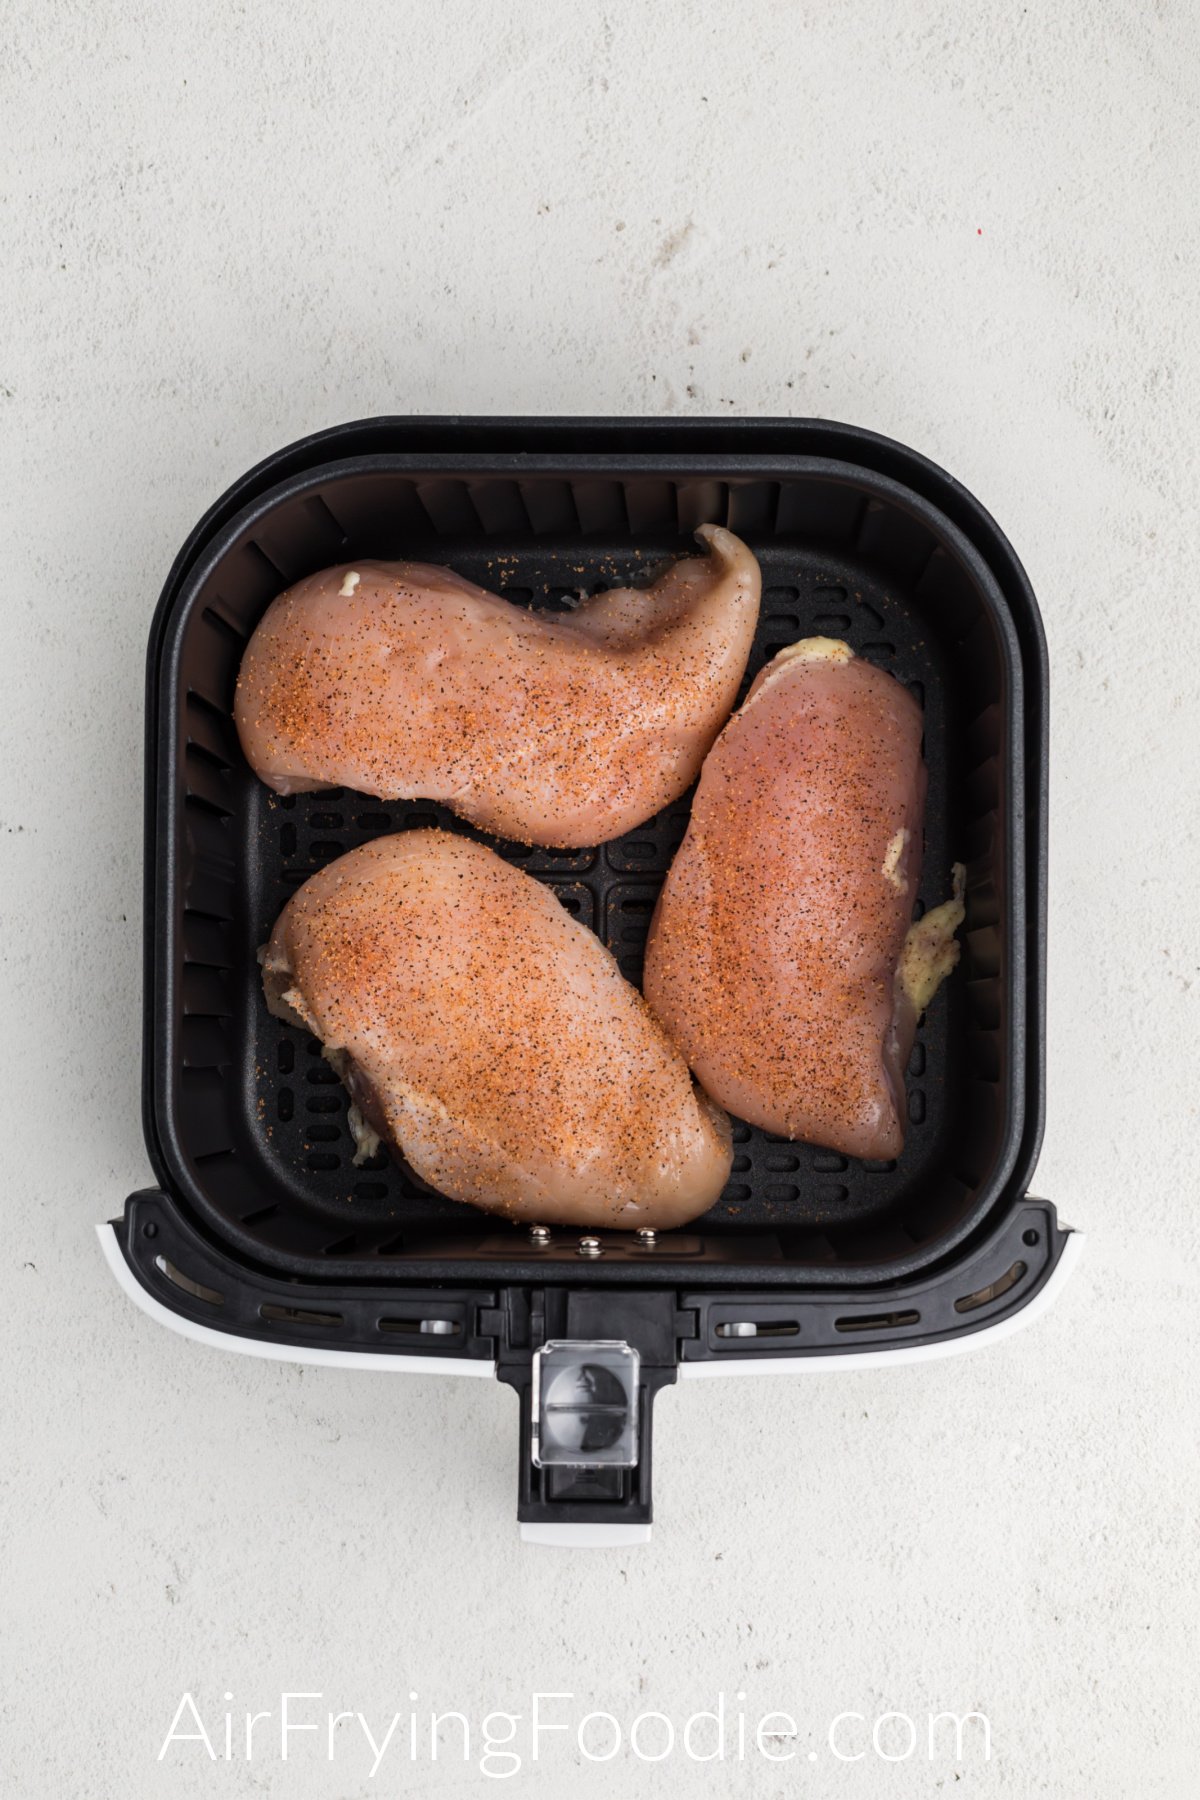 frozen chicken breasts seasoned and placed in a single later in the air fryer basket.